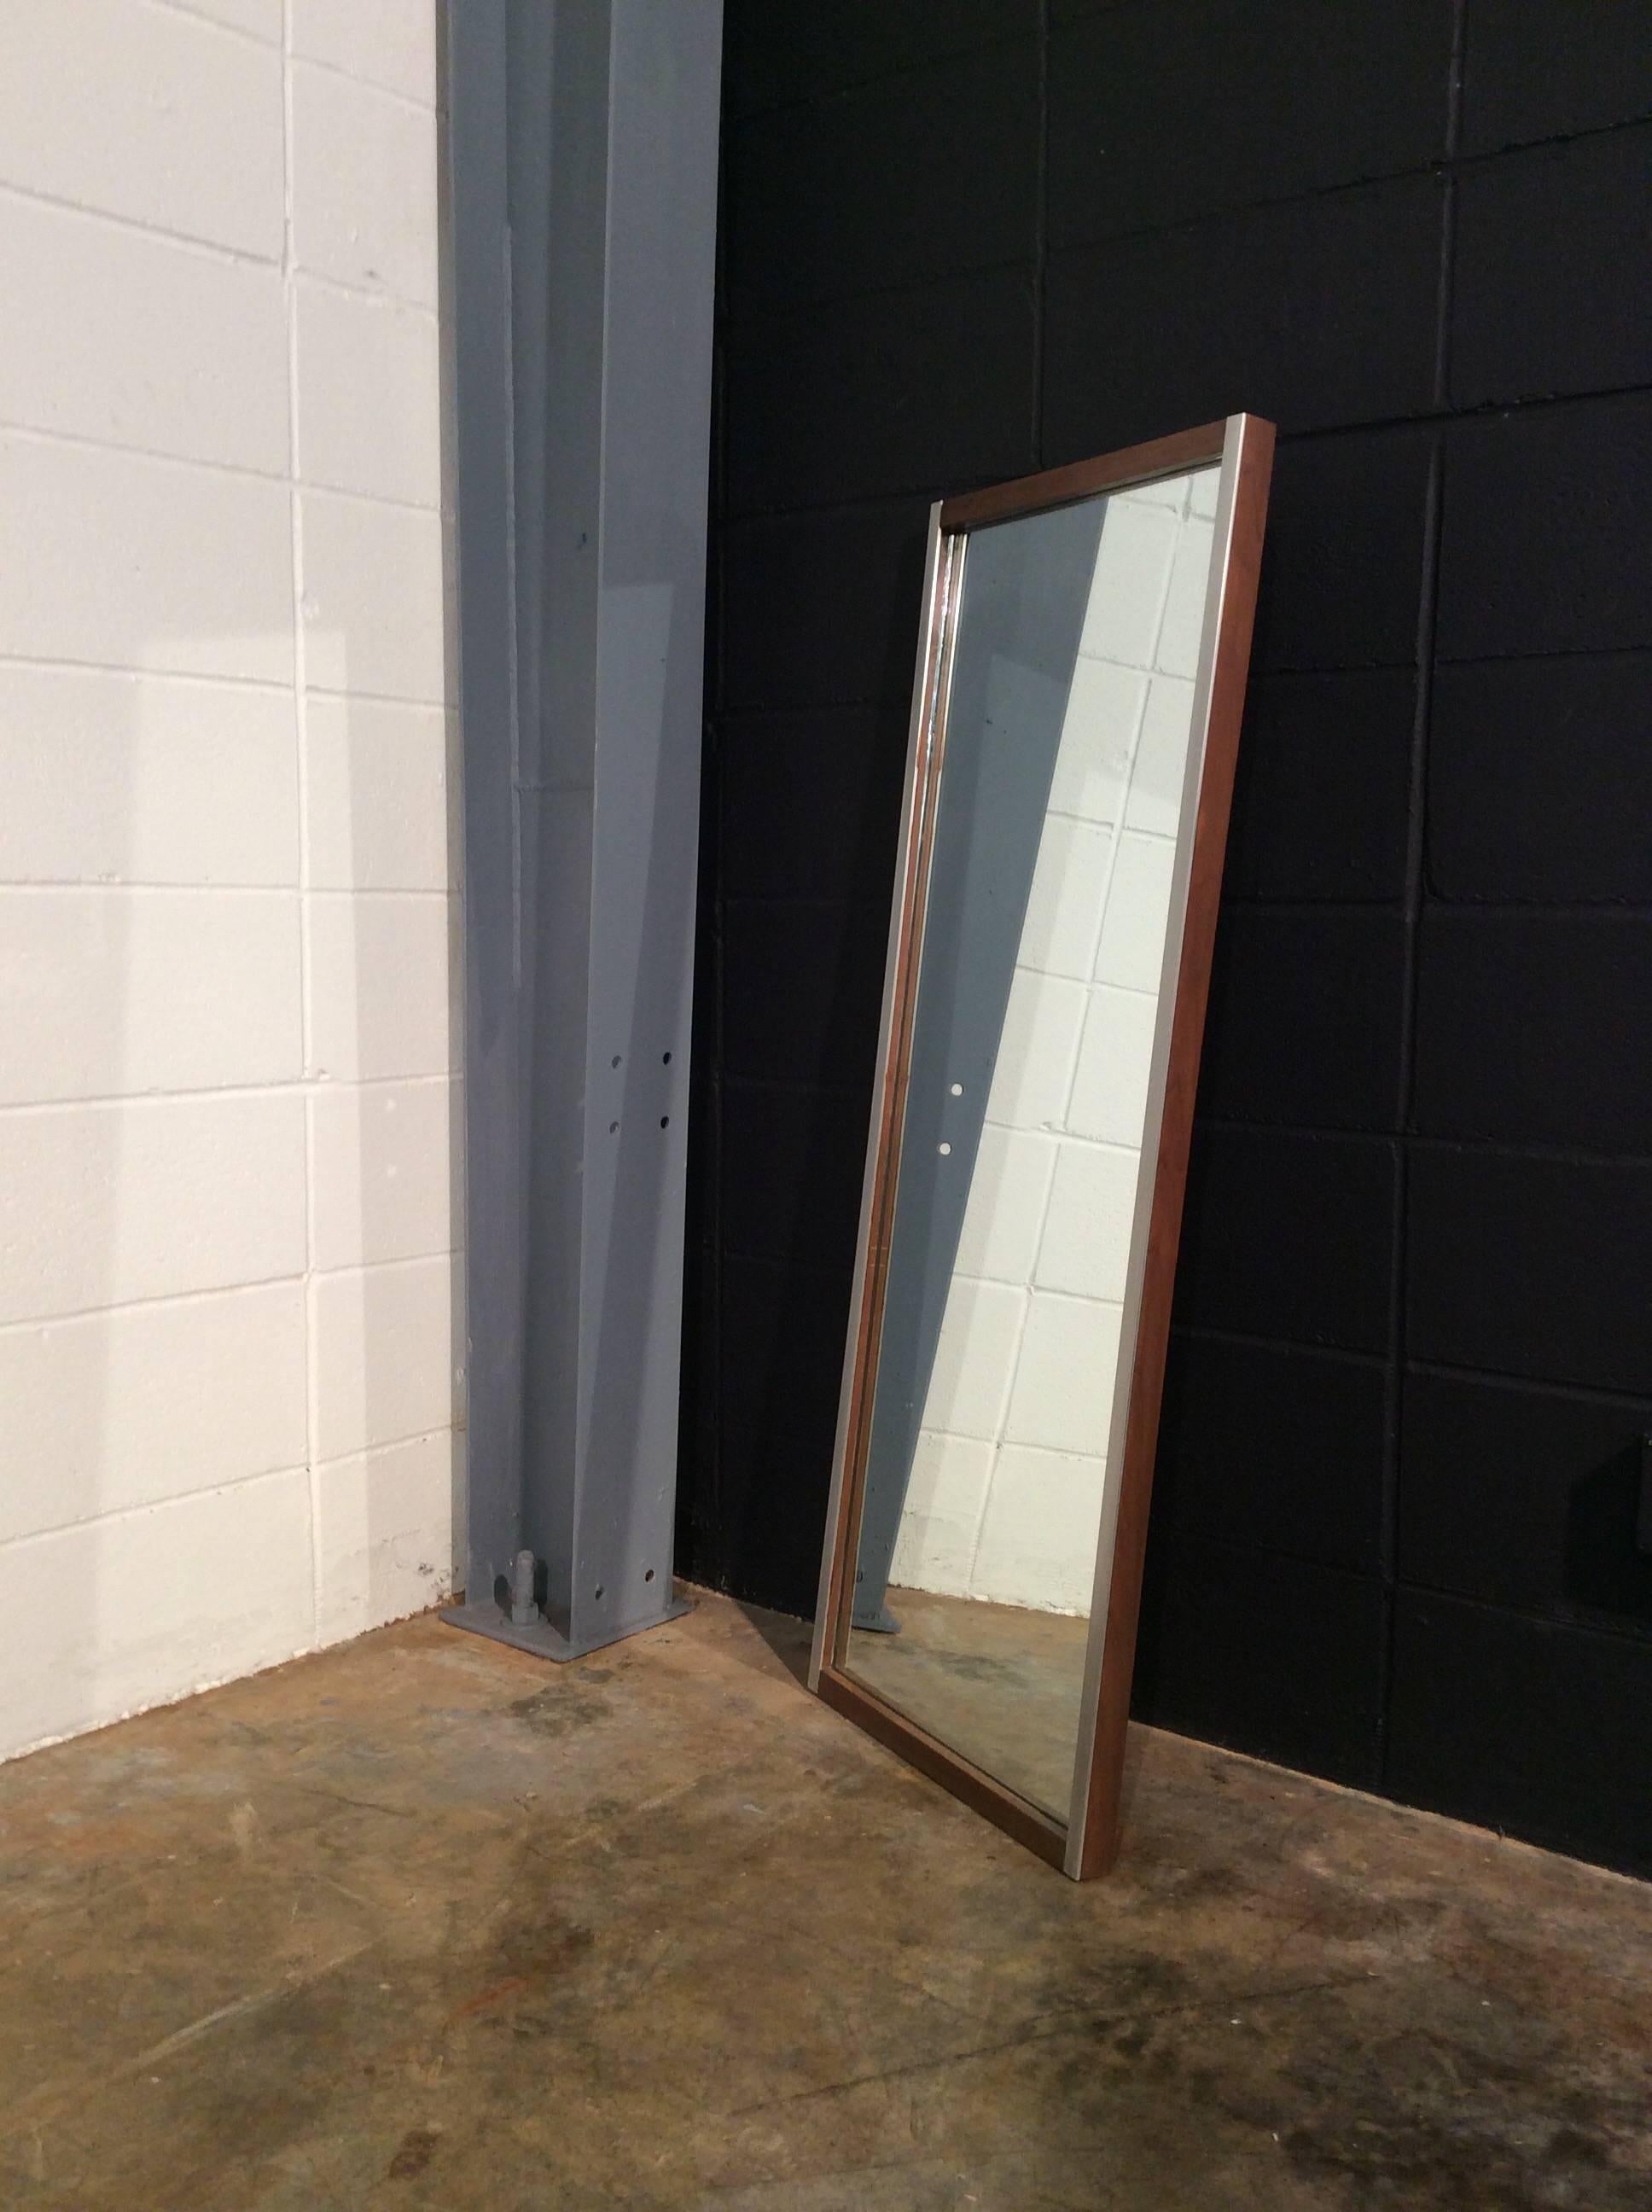 Walnut and aluminum mirror by Paul McCobb for Bryce Originals. Produced February 3rd, 1953
the walnut frame is in really good original condition with minimal wear. The aluminum trim is secured tightly with only minimal surface wear. The mirror